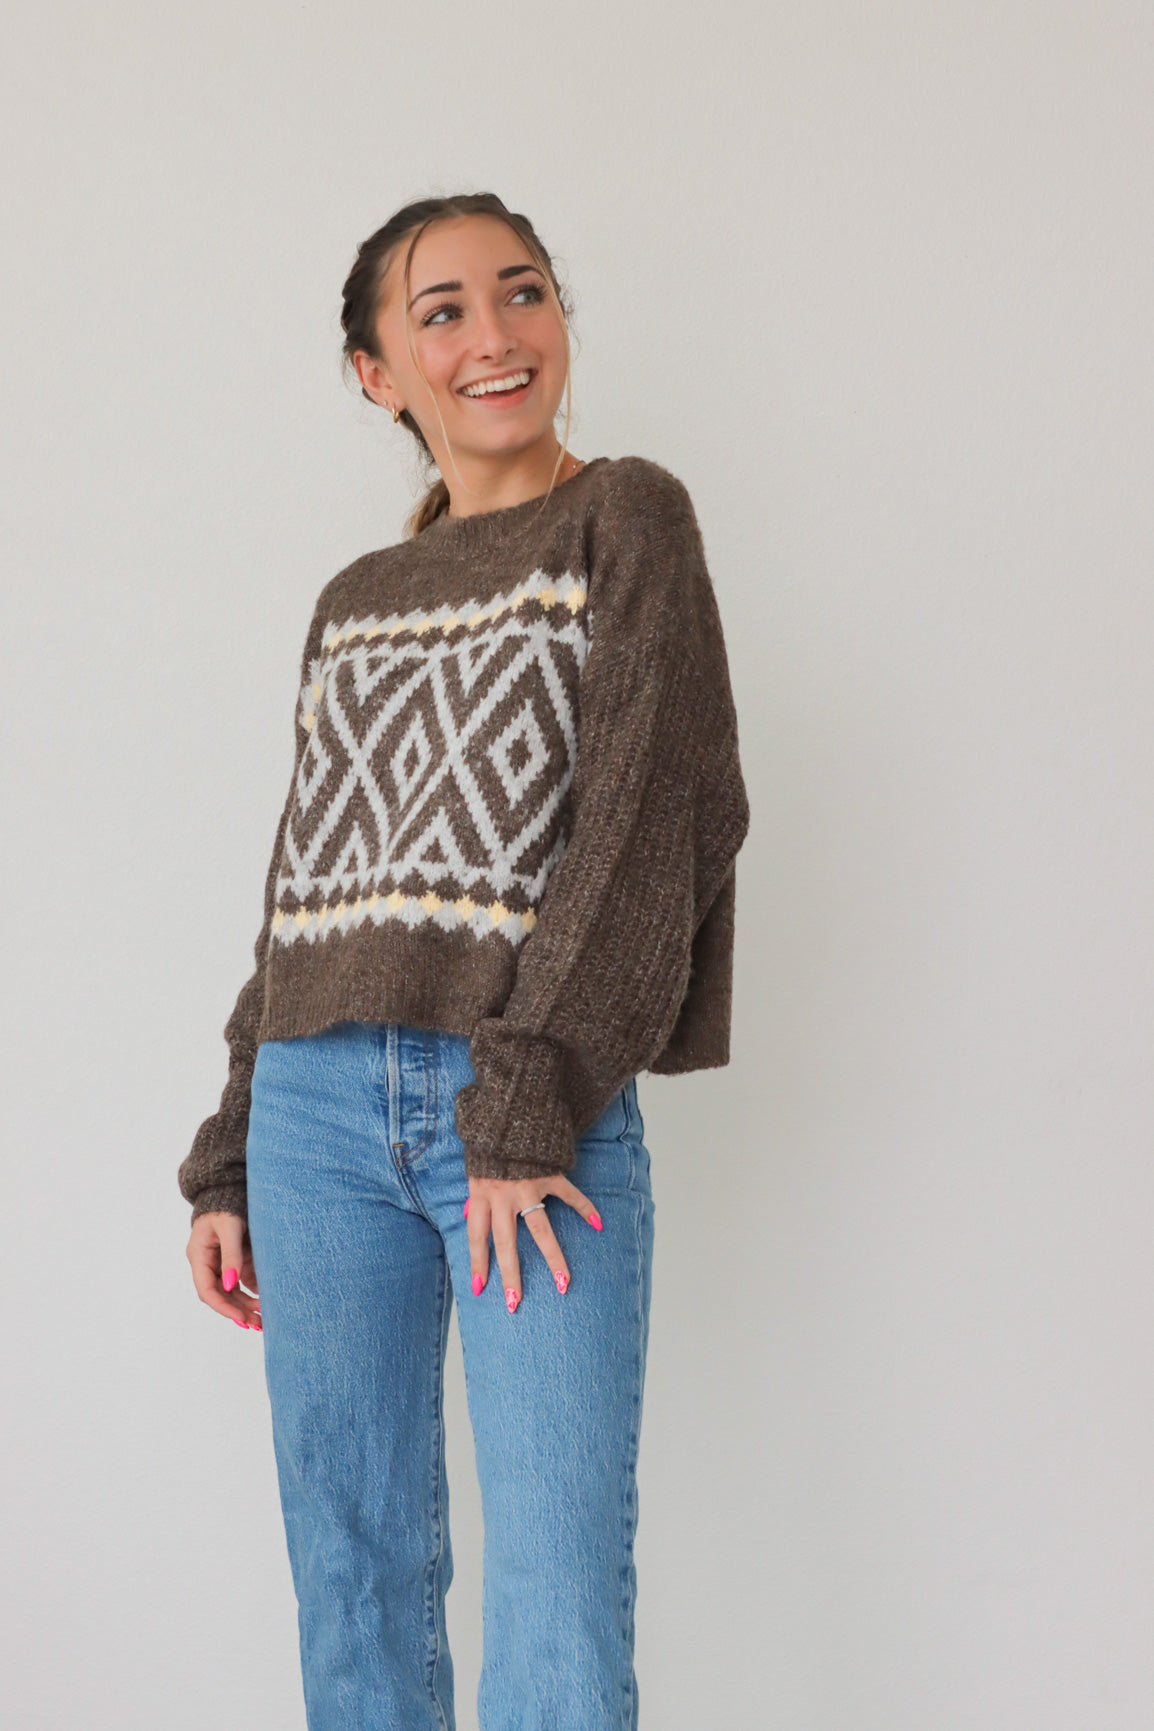 girl wearing brown knit sweater with light and cream detailing